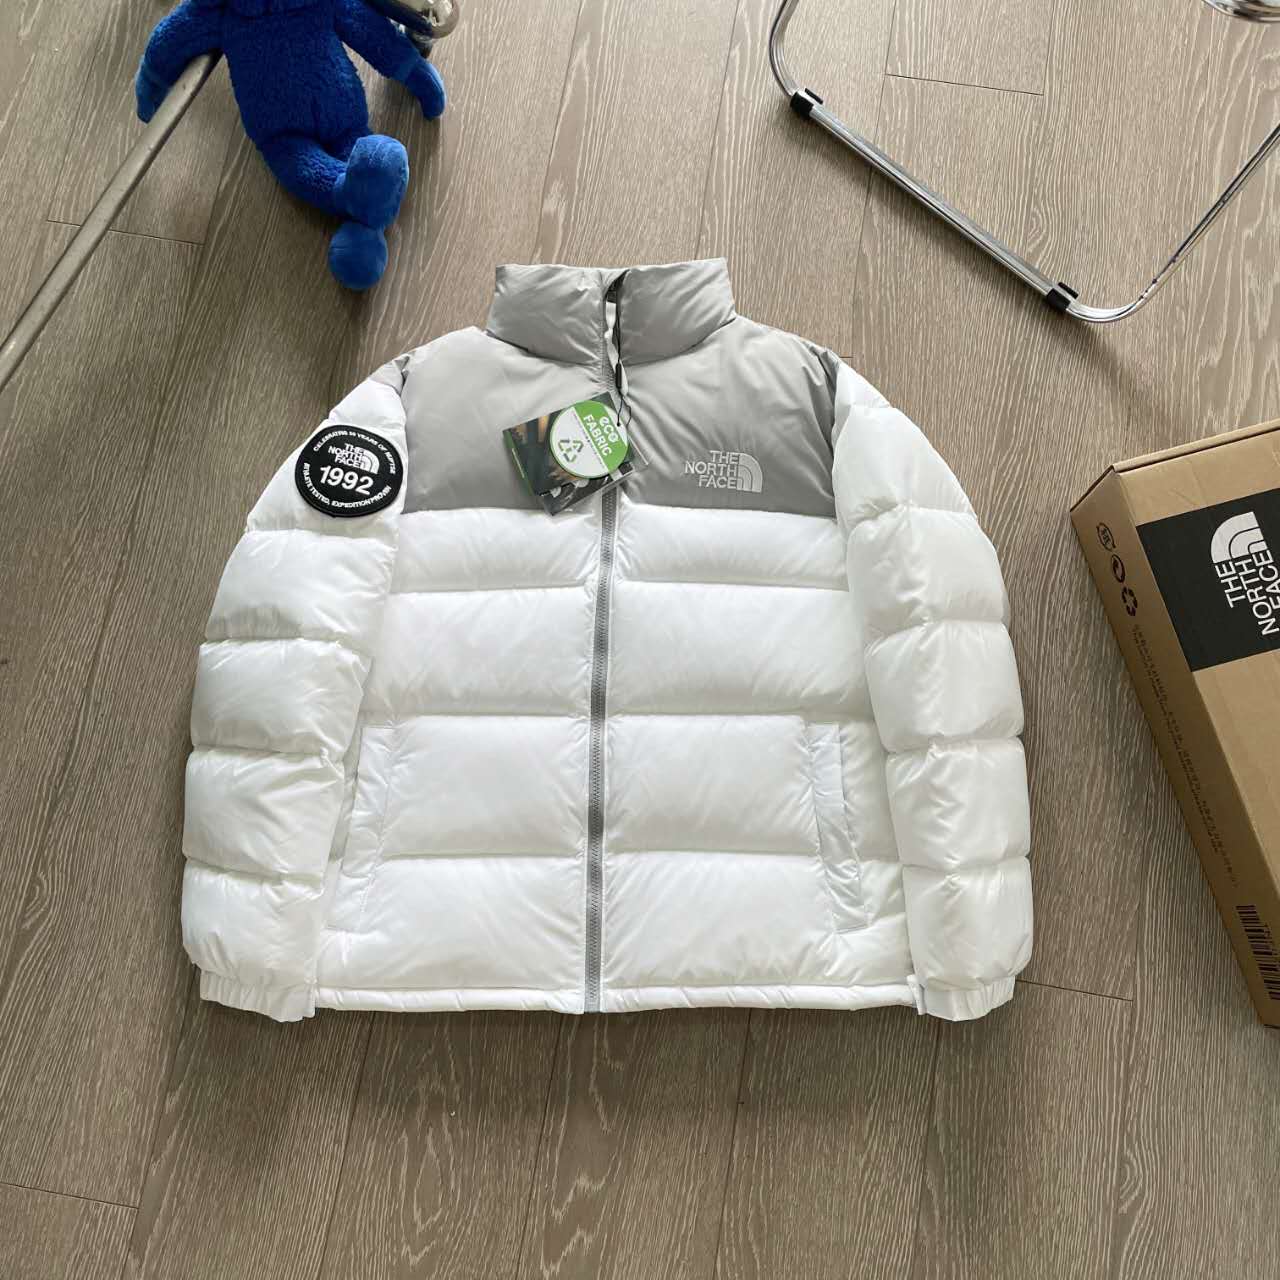 The North Face Sale
 Clothing Down Jacket Black White Embroidery Nylon Duck Down